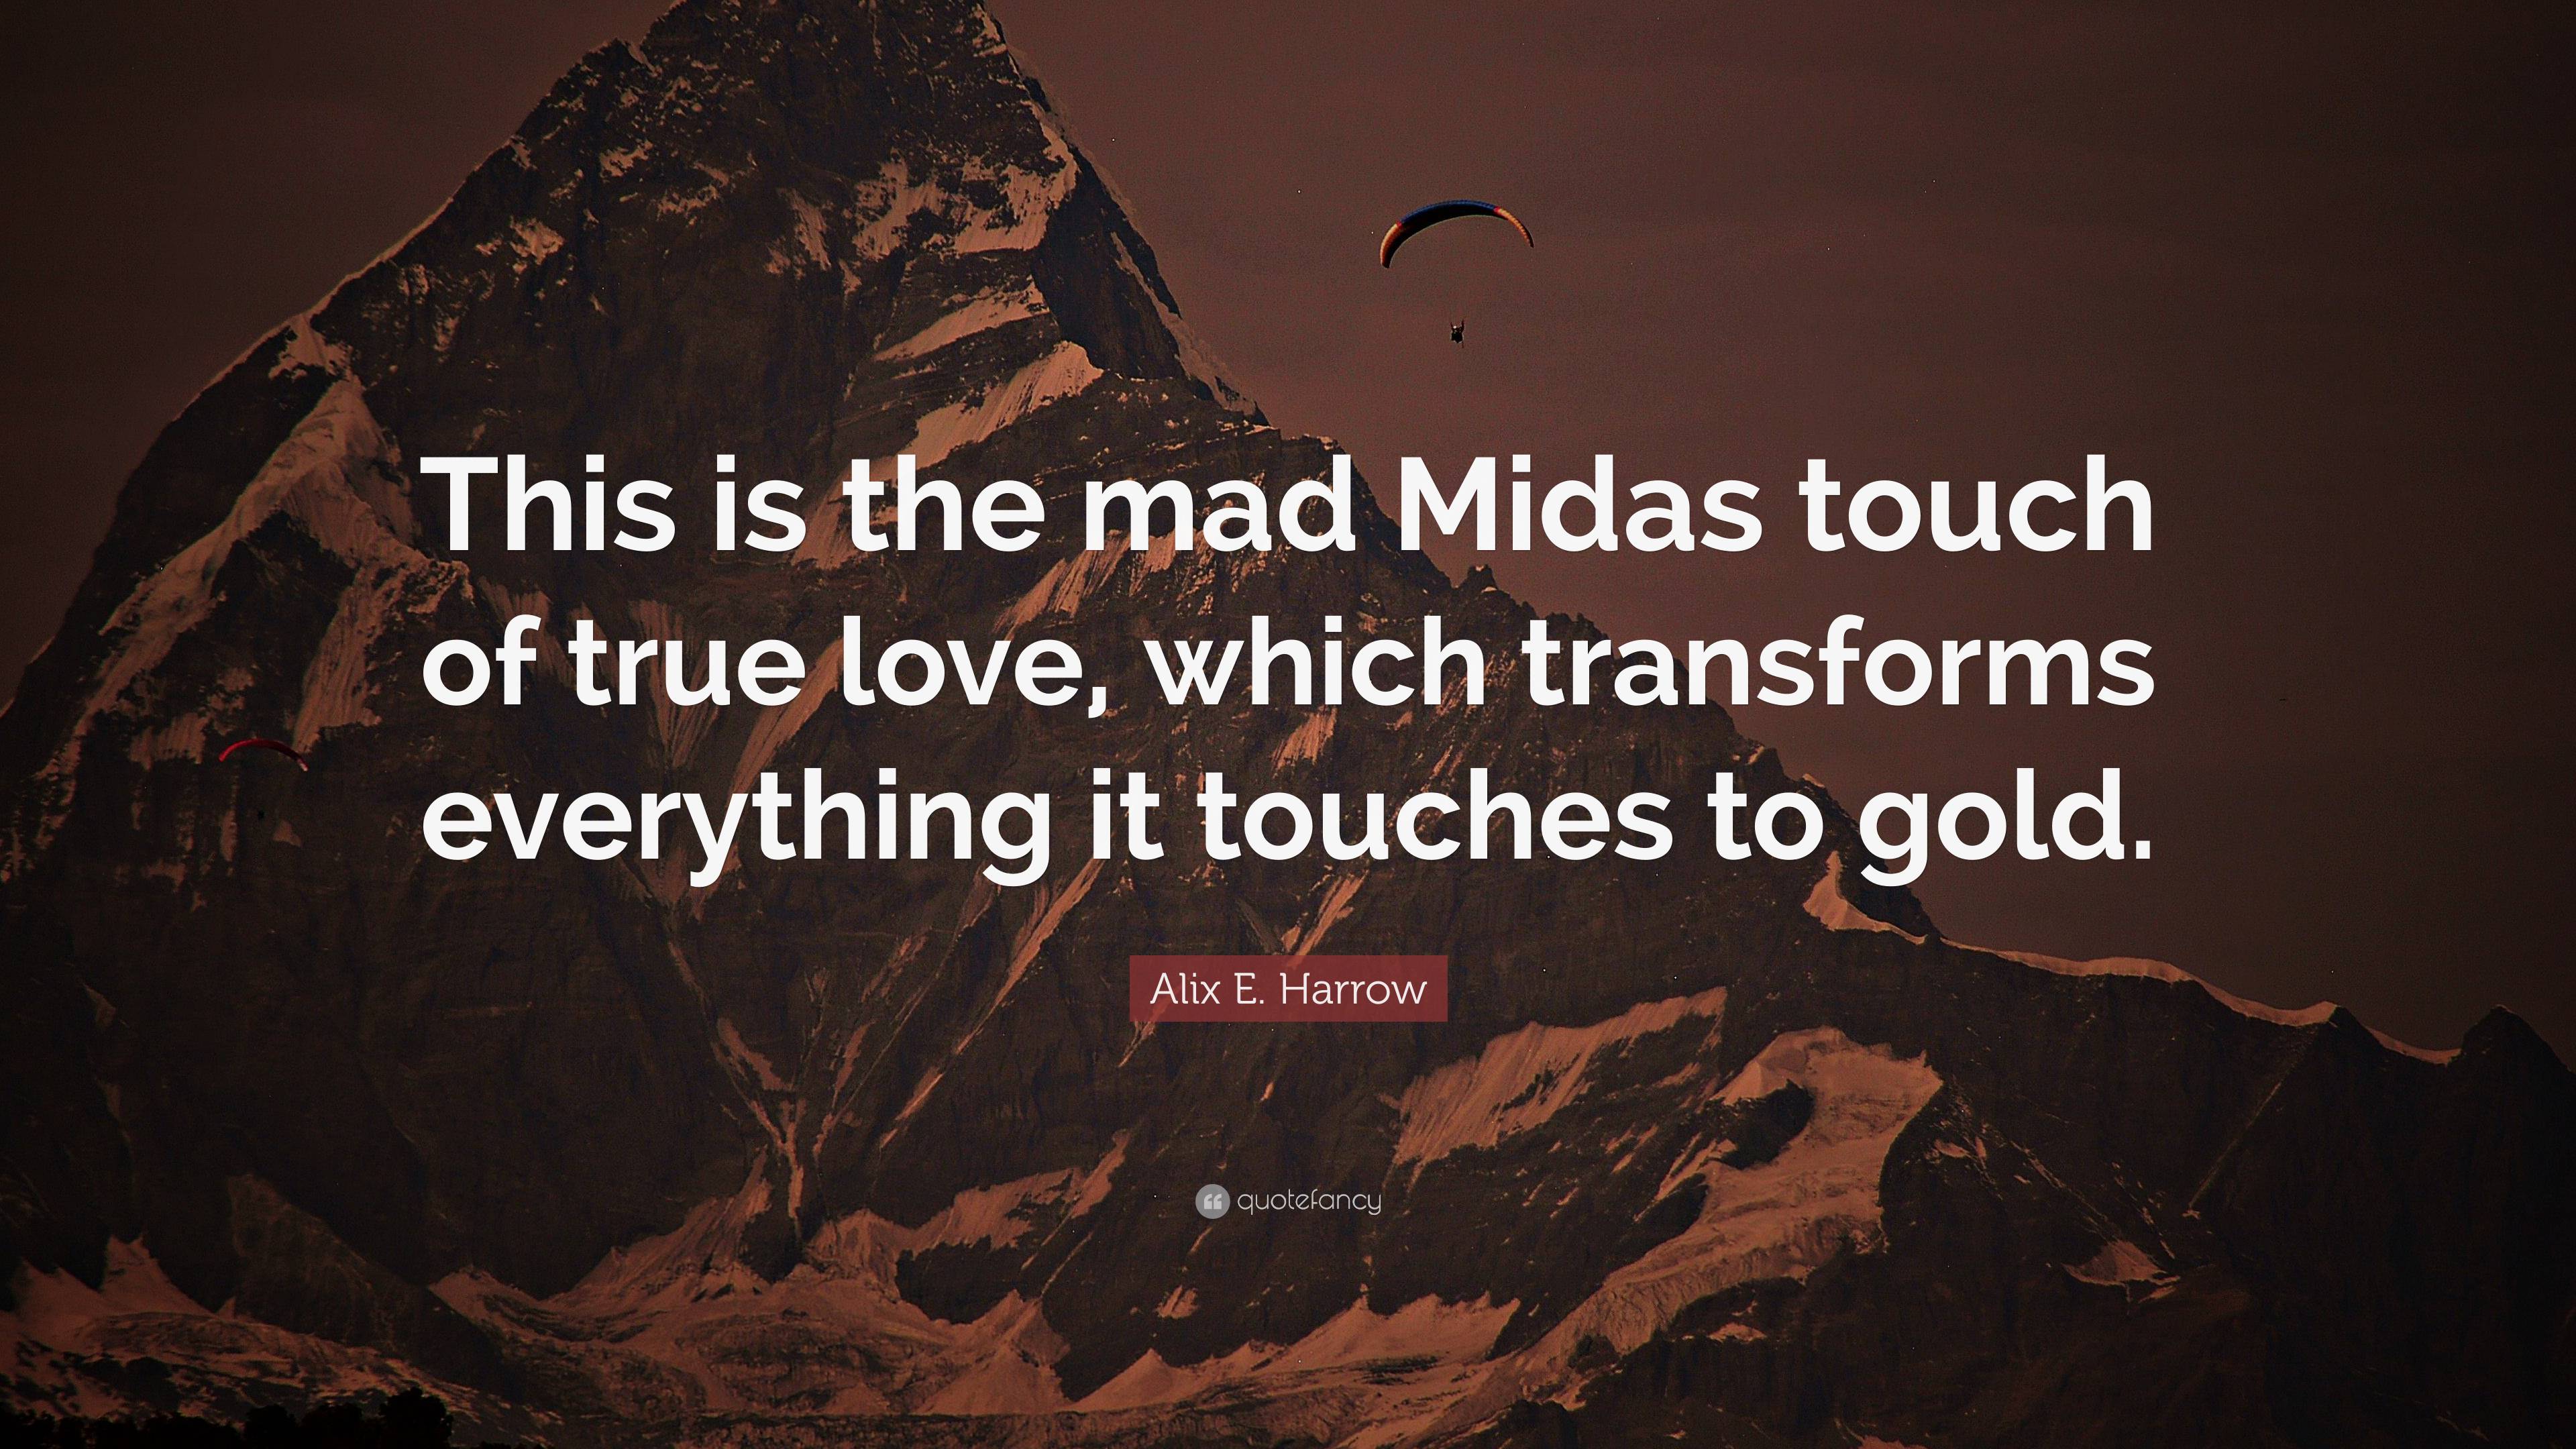 Top 18 Quotes About Midas Touch: Famous Quotes & Sayings About Midas Touch